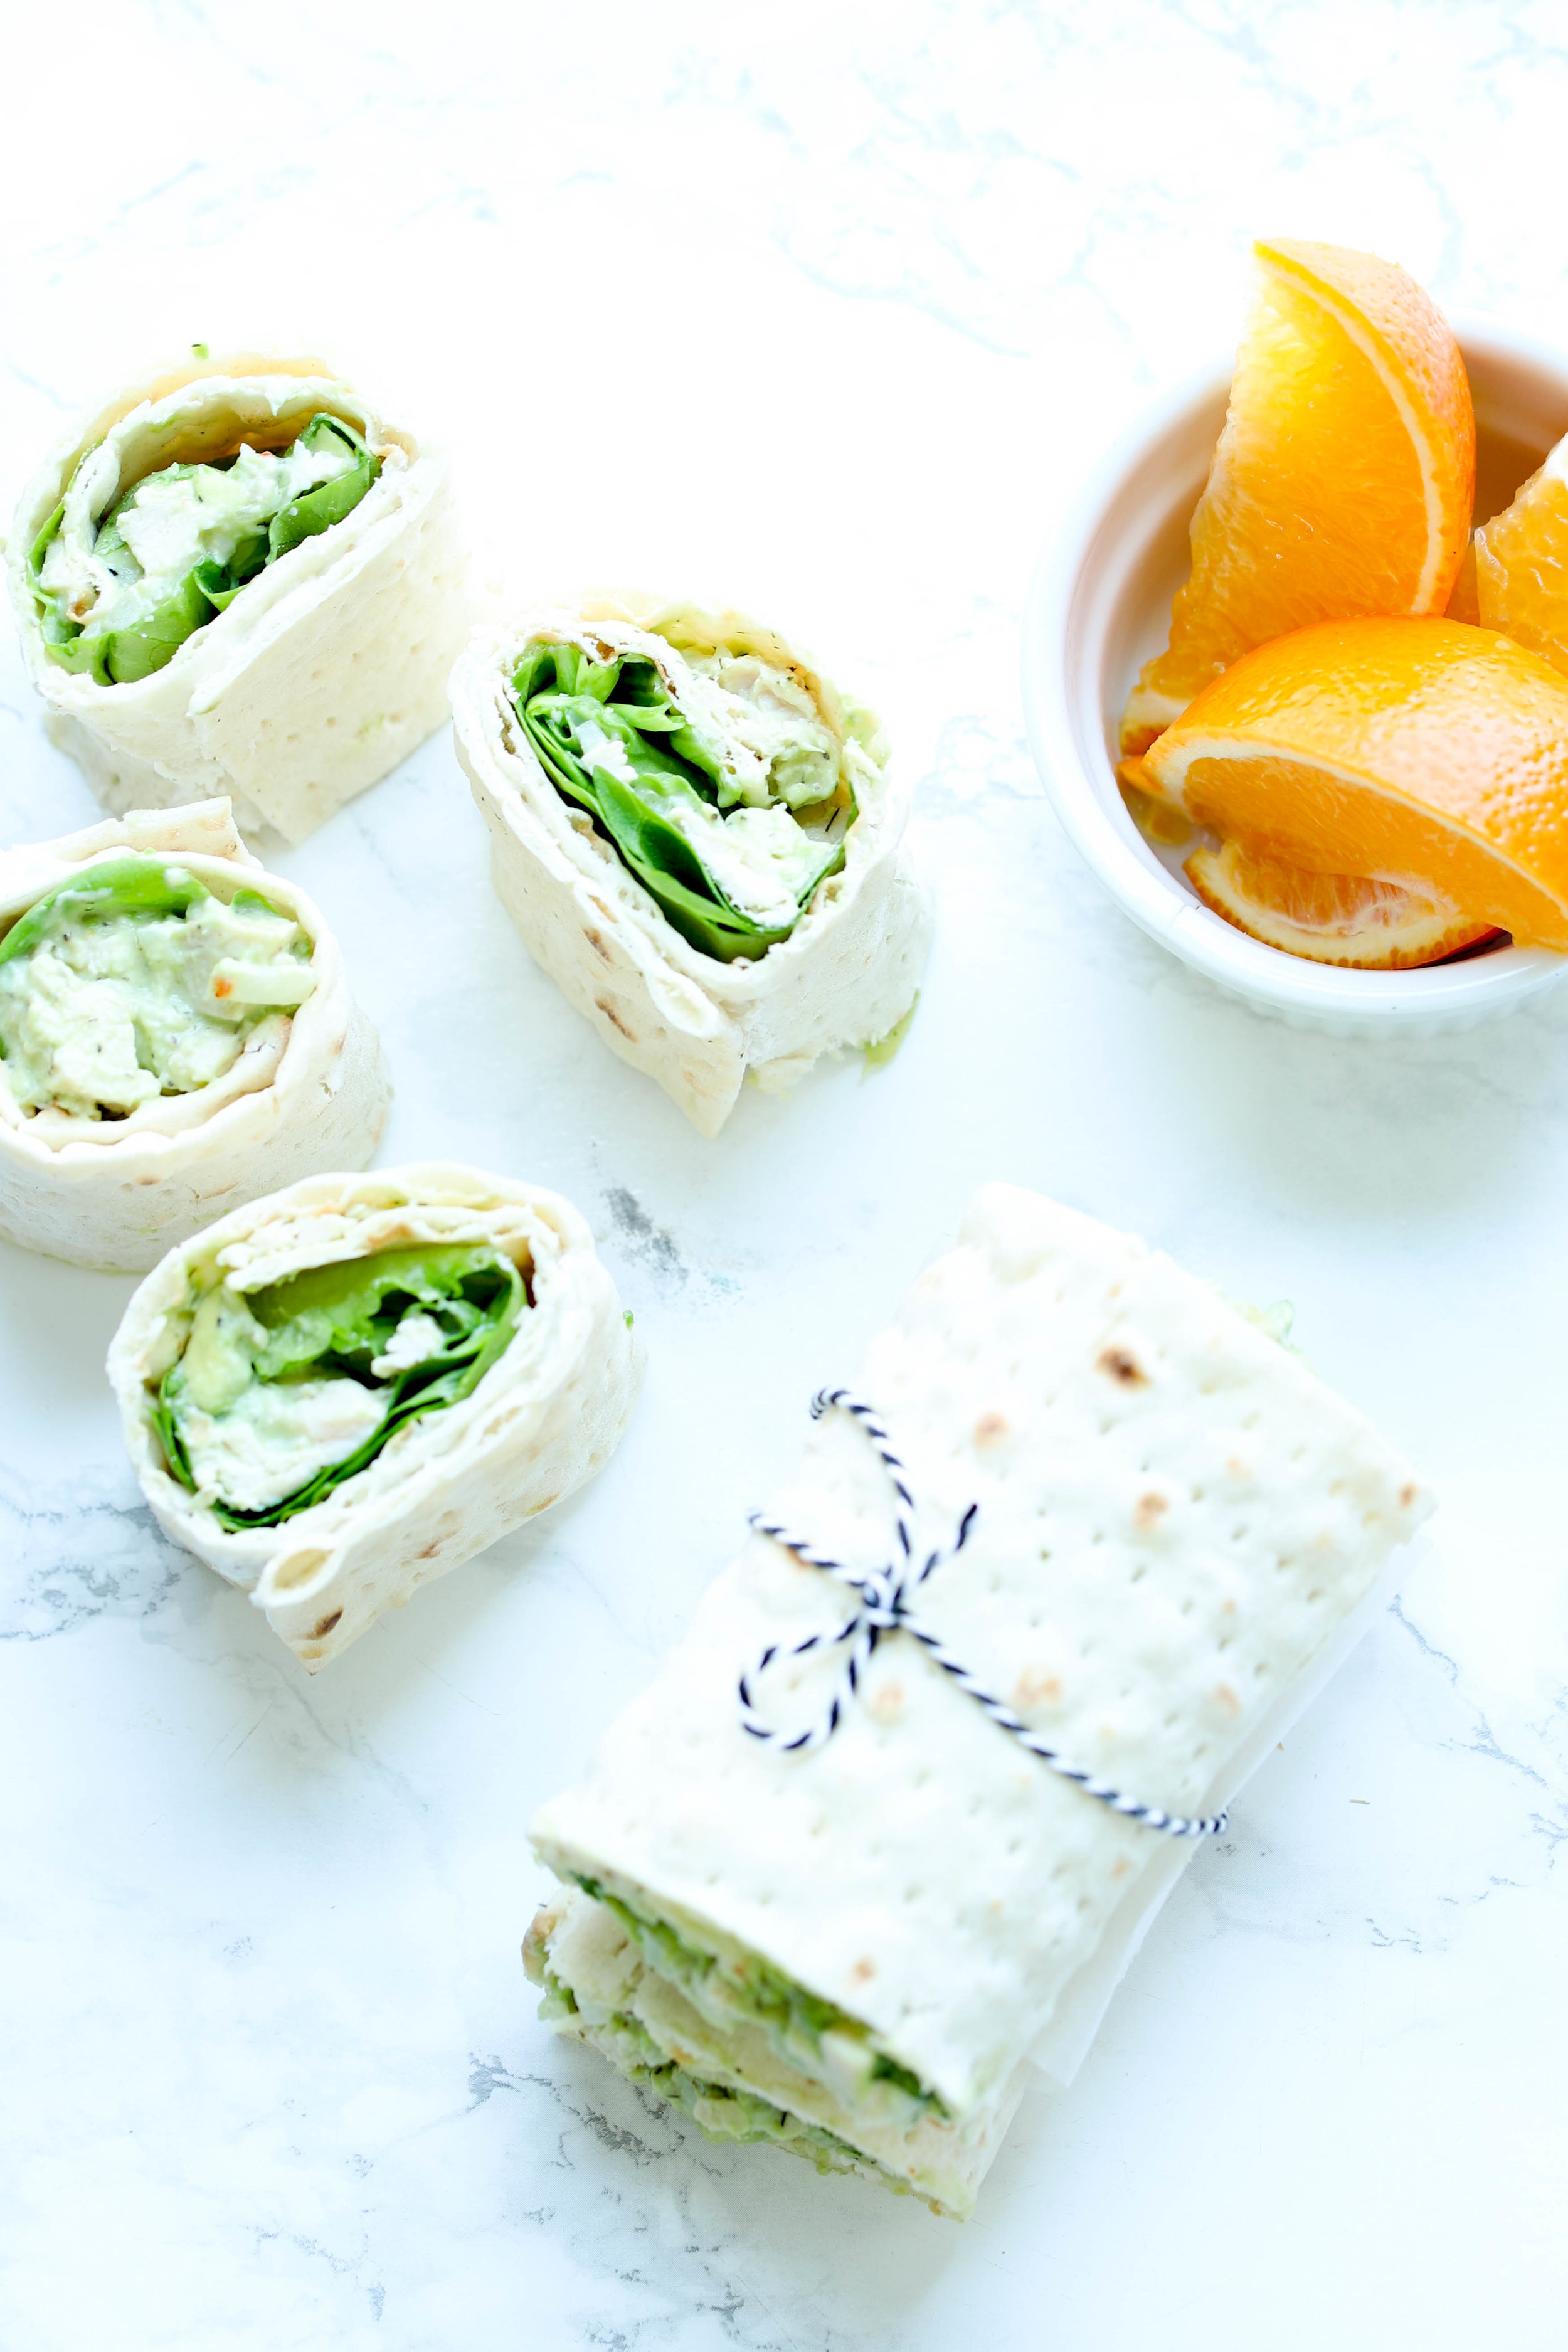 Lunchbox Chicken Avocado Salad Wrap is a healthier take on classic chicken salad. It is quick &amp; packed with healthy fats, and protein for your lunchbox.